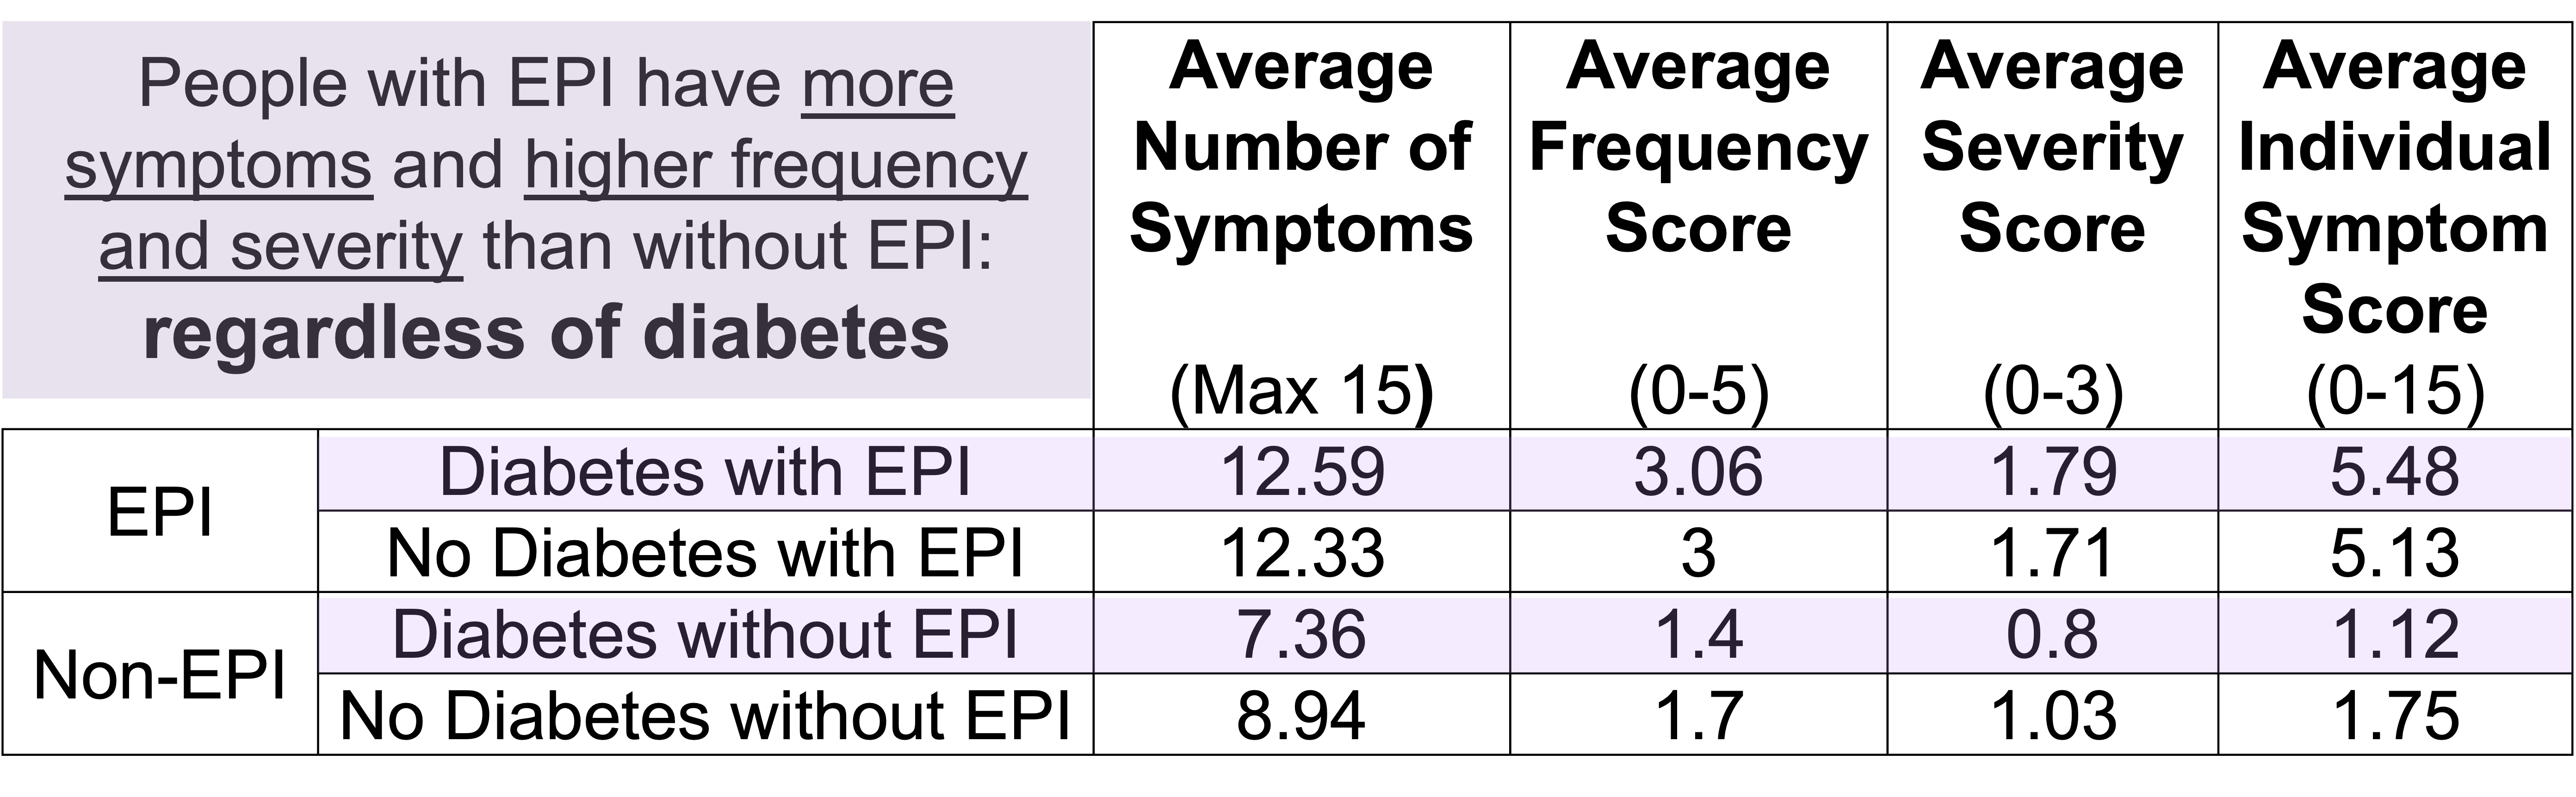 A table comparing the average number of symptoms, frequency, severity, and individual symptom scores between people with diabetes with and without exocrine pancreatic insufficiency (EPI). People with EPI have more symptoms and higher frequency and severity than without EPI: regardless of diabetes. 